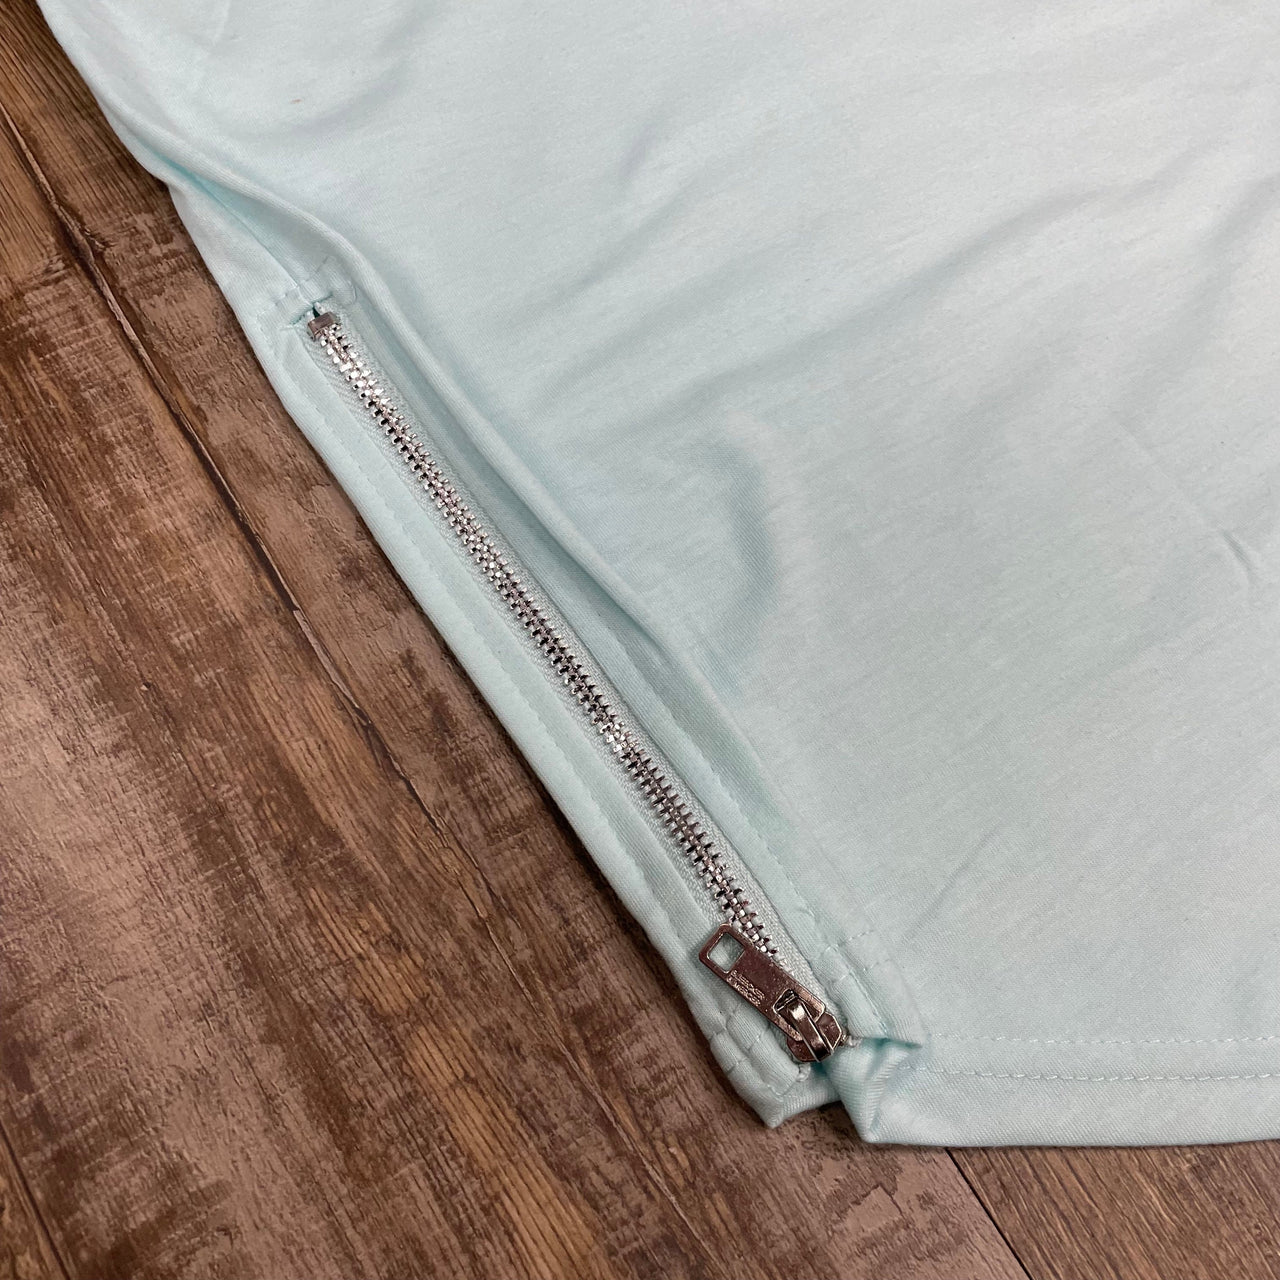 Scallop Hem Curved Bottom Long Fit Extended Men's Streetwear T-Shirt with Side Zippers | Pastel Turquoise